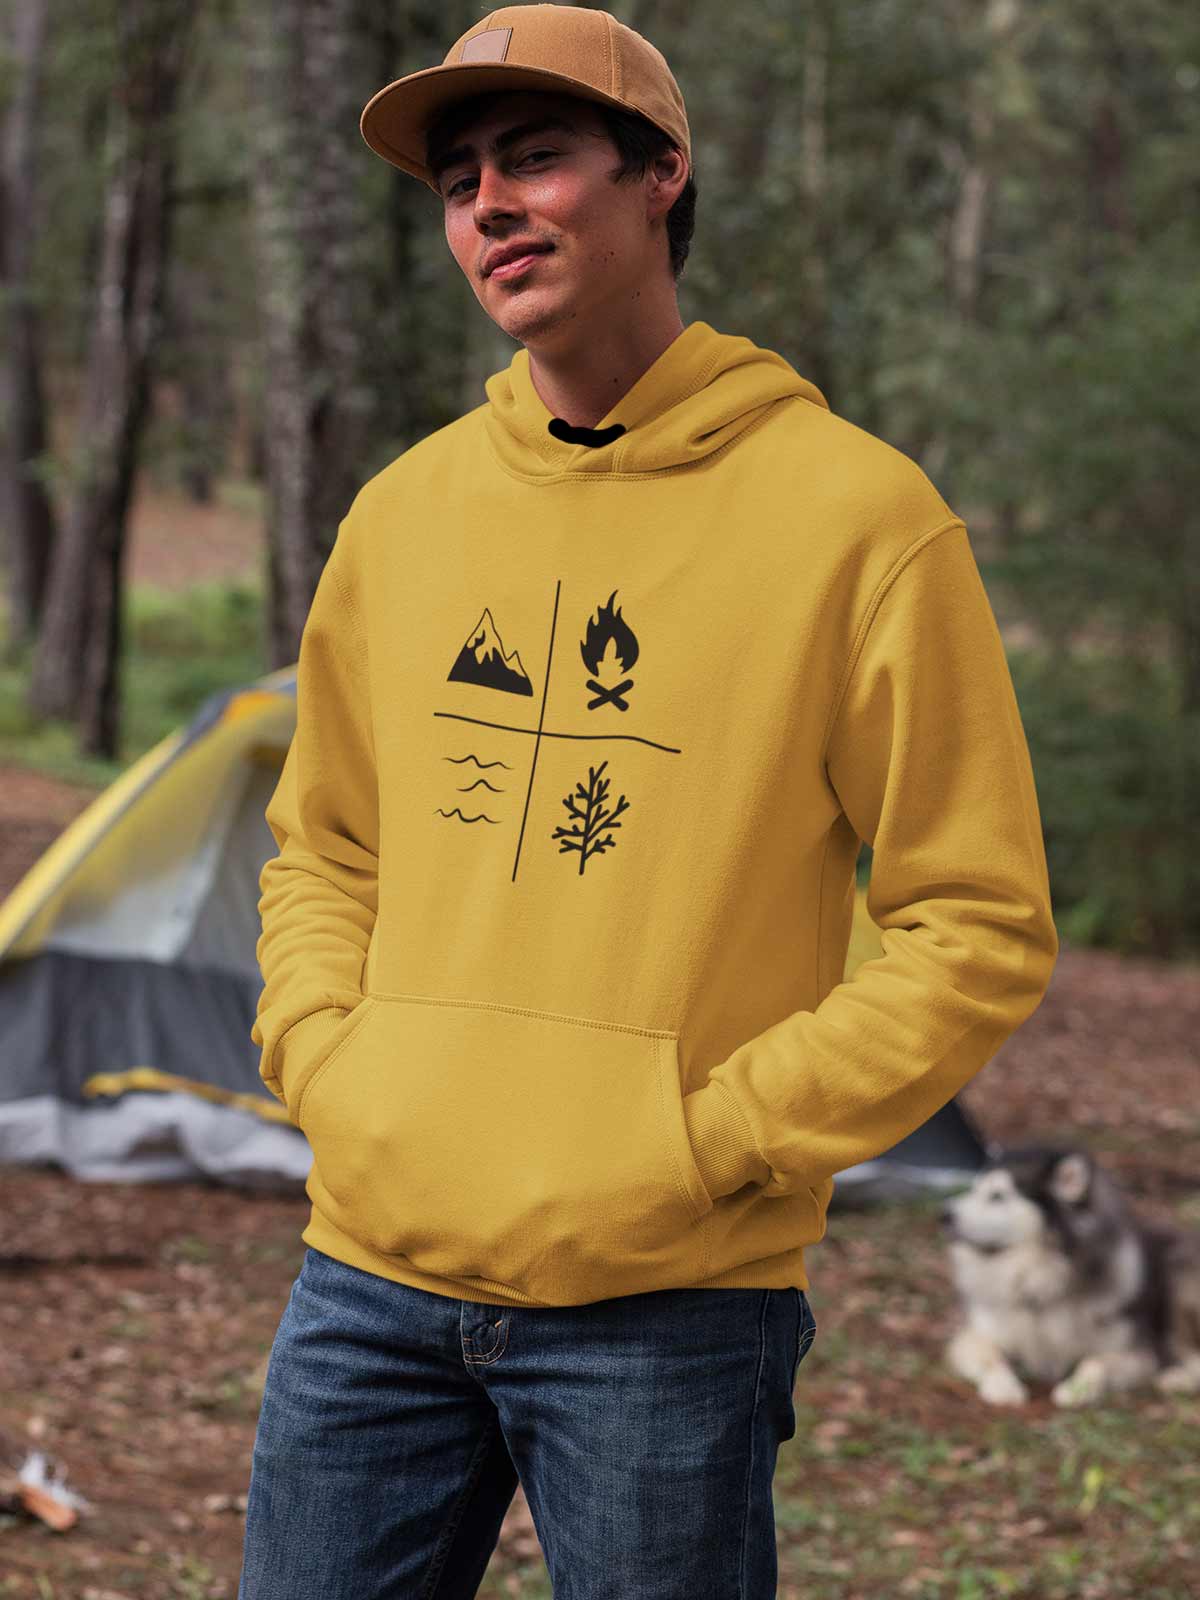 Camping Printed Cotton Hoodie for men & women by shopghumakkad